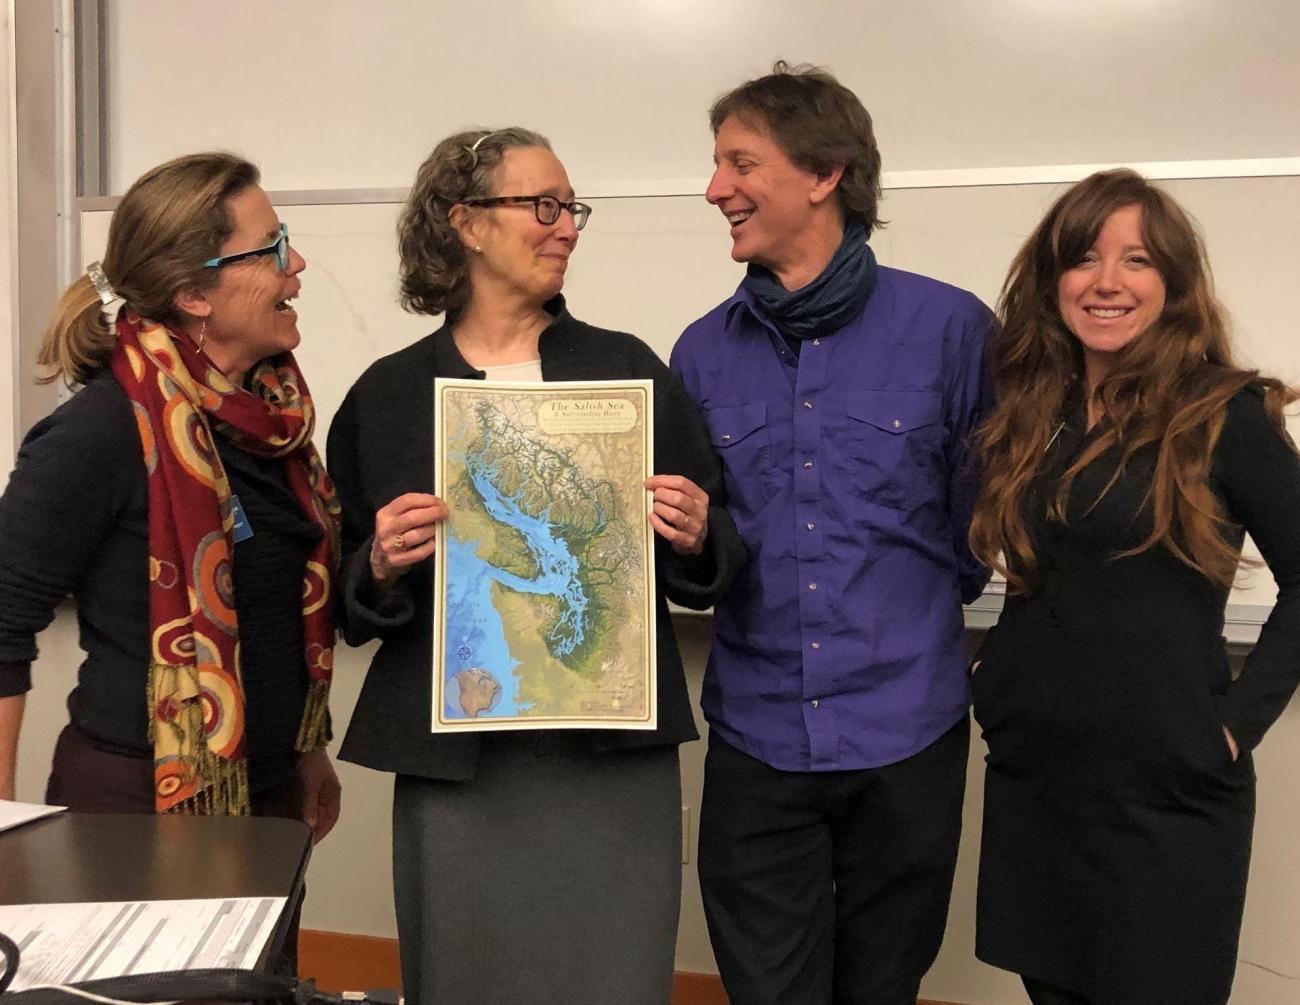 Lynda Mapes and Stefan Freelan exchanging smiles while Lynda holds the Salish Sea map that Stefan created. Also in the picture is Ginny Broadhurst and Natalie Baloy.